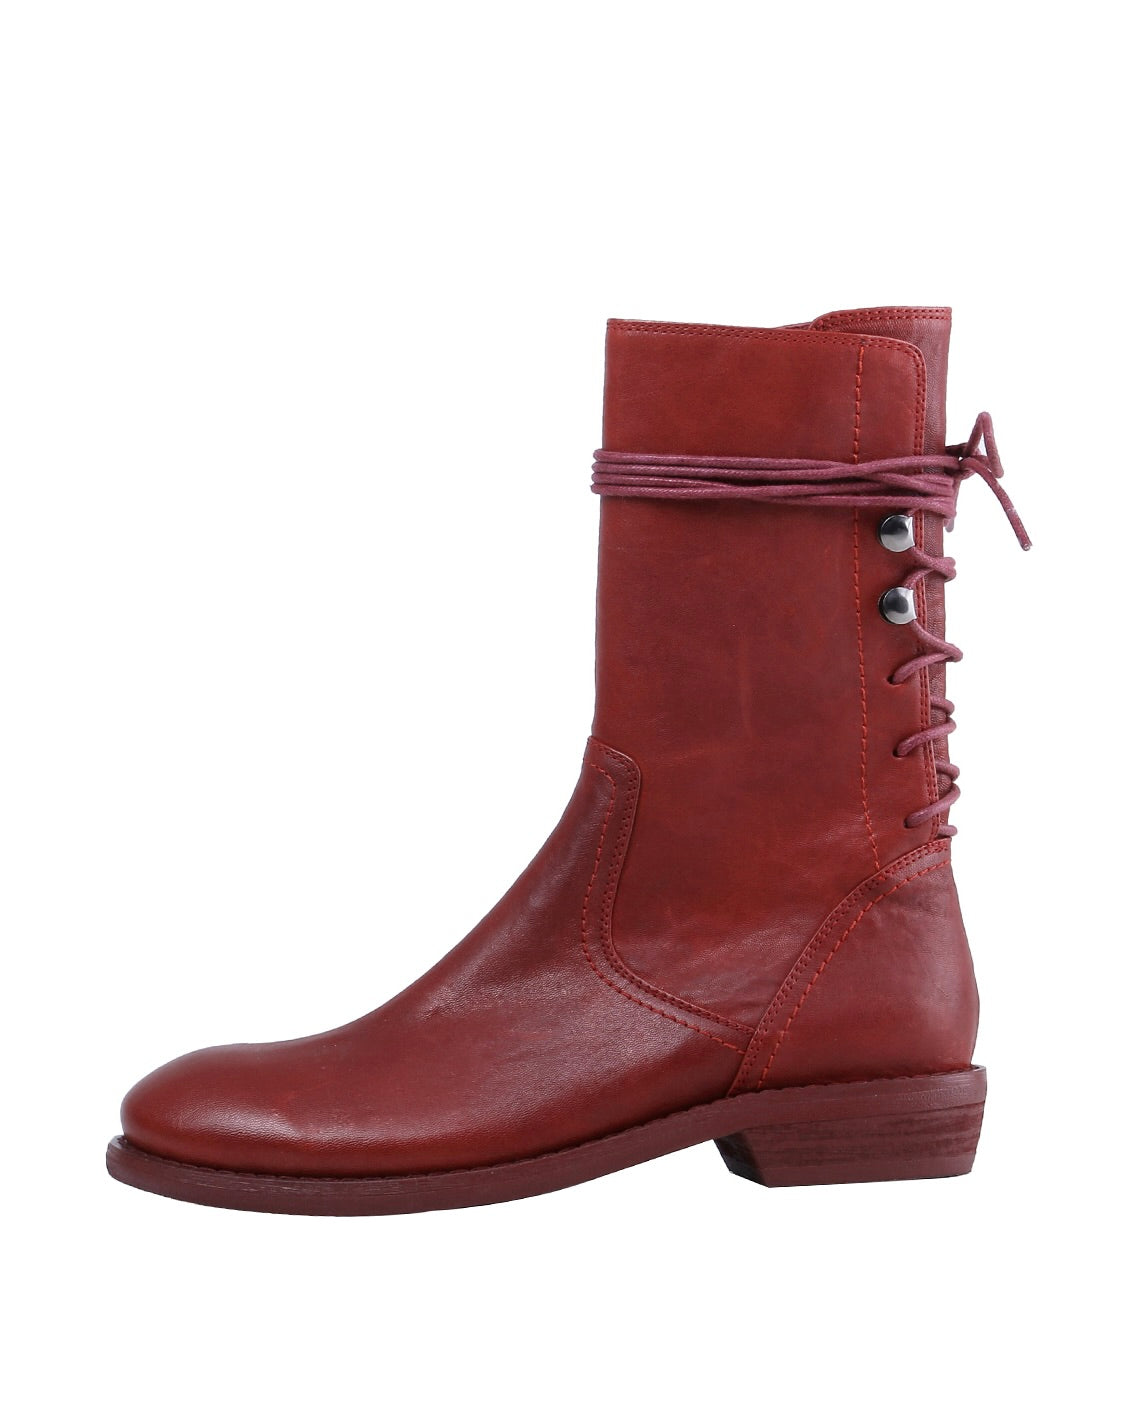 730-horsehide-boots-red-1